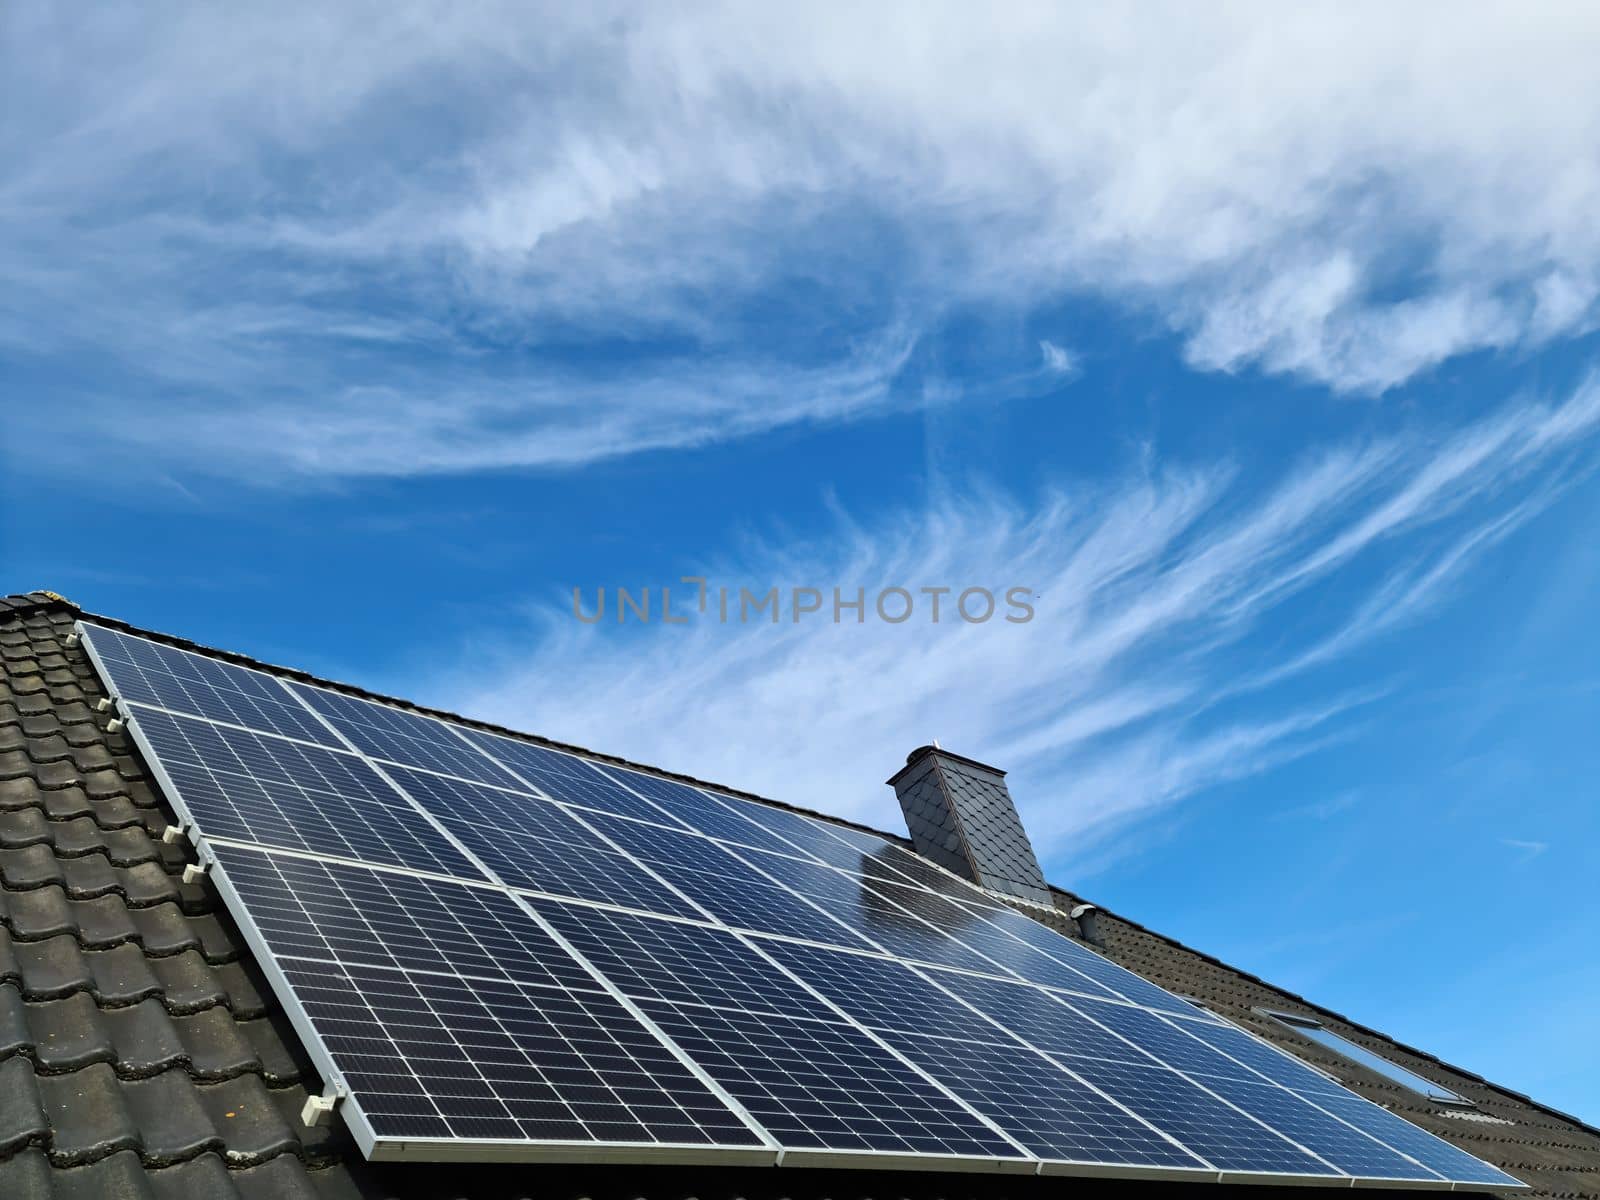 Solar panels producing clean energy on a roof of a residential house in Germany by MP_foto71